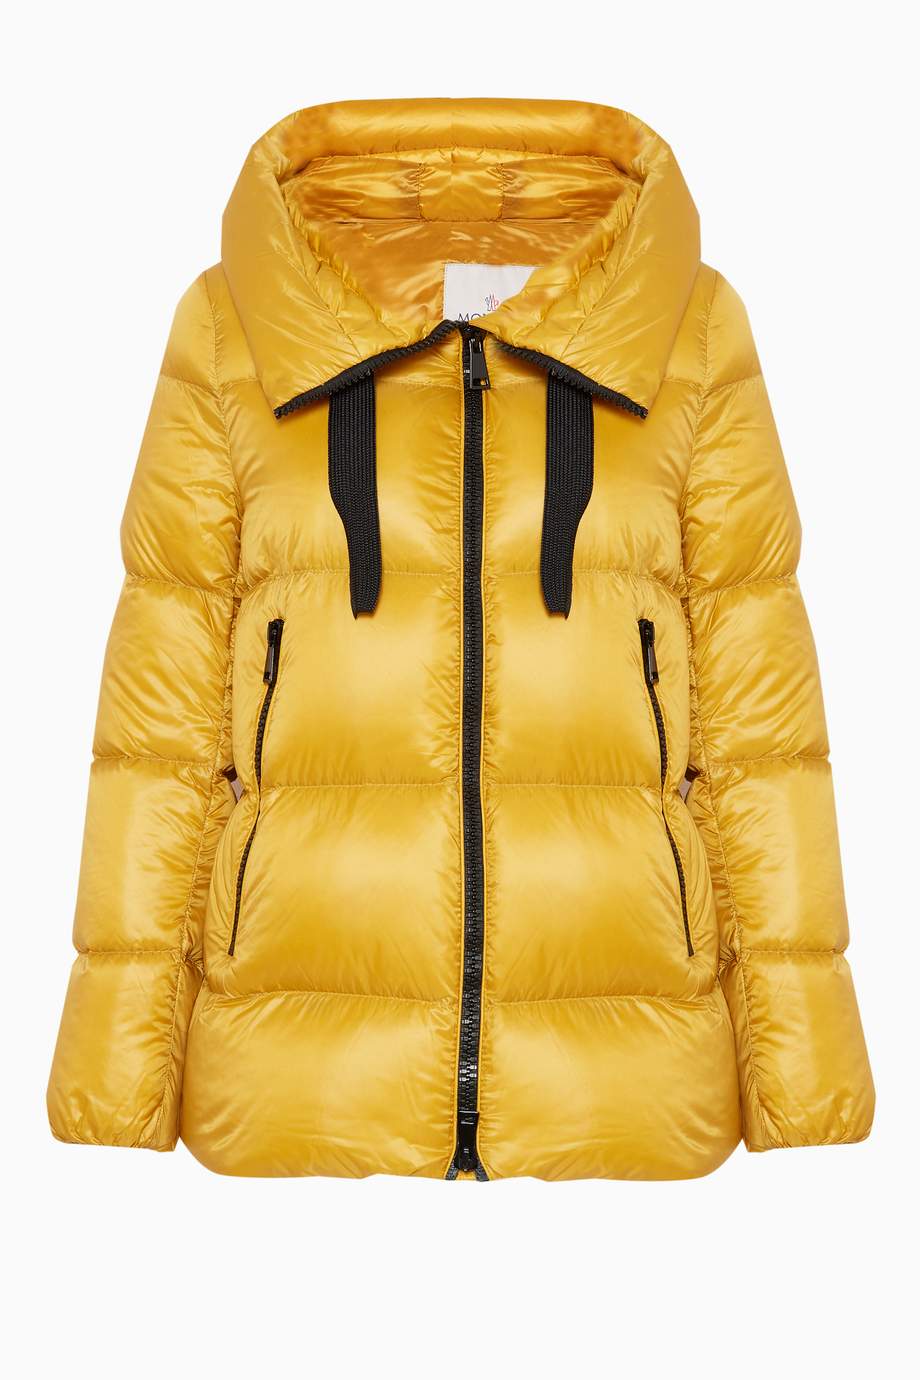 Shop Moncler Yellow Mustard-Yellow Hooded Serin Jacket for Women ...